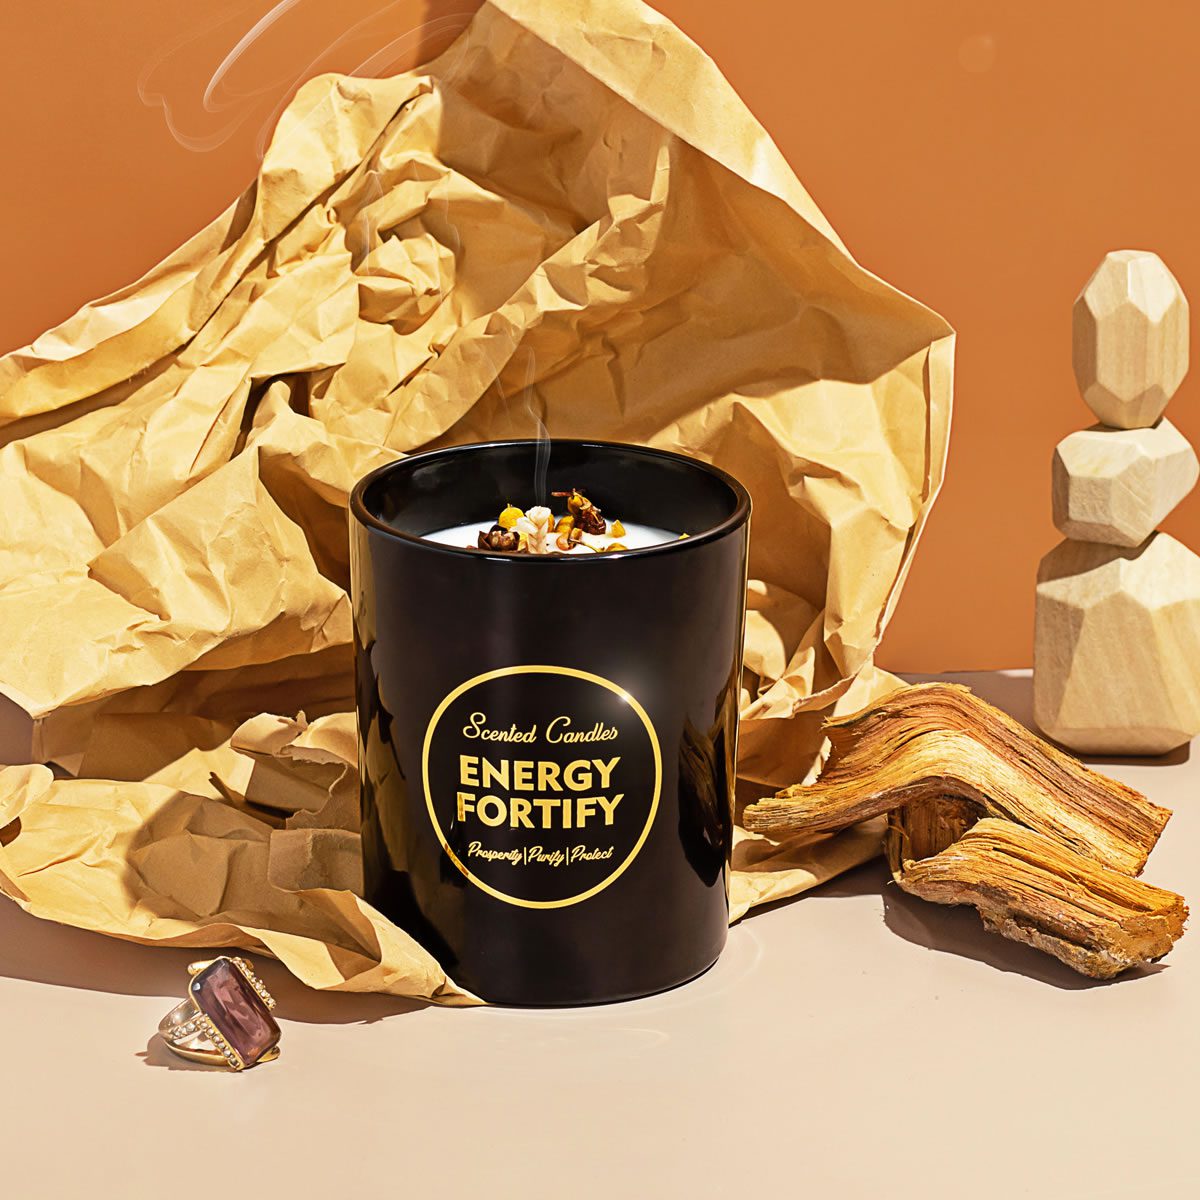 Unbranded Energy fortify scented candle